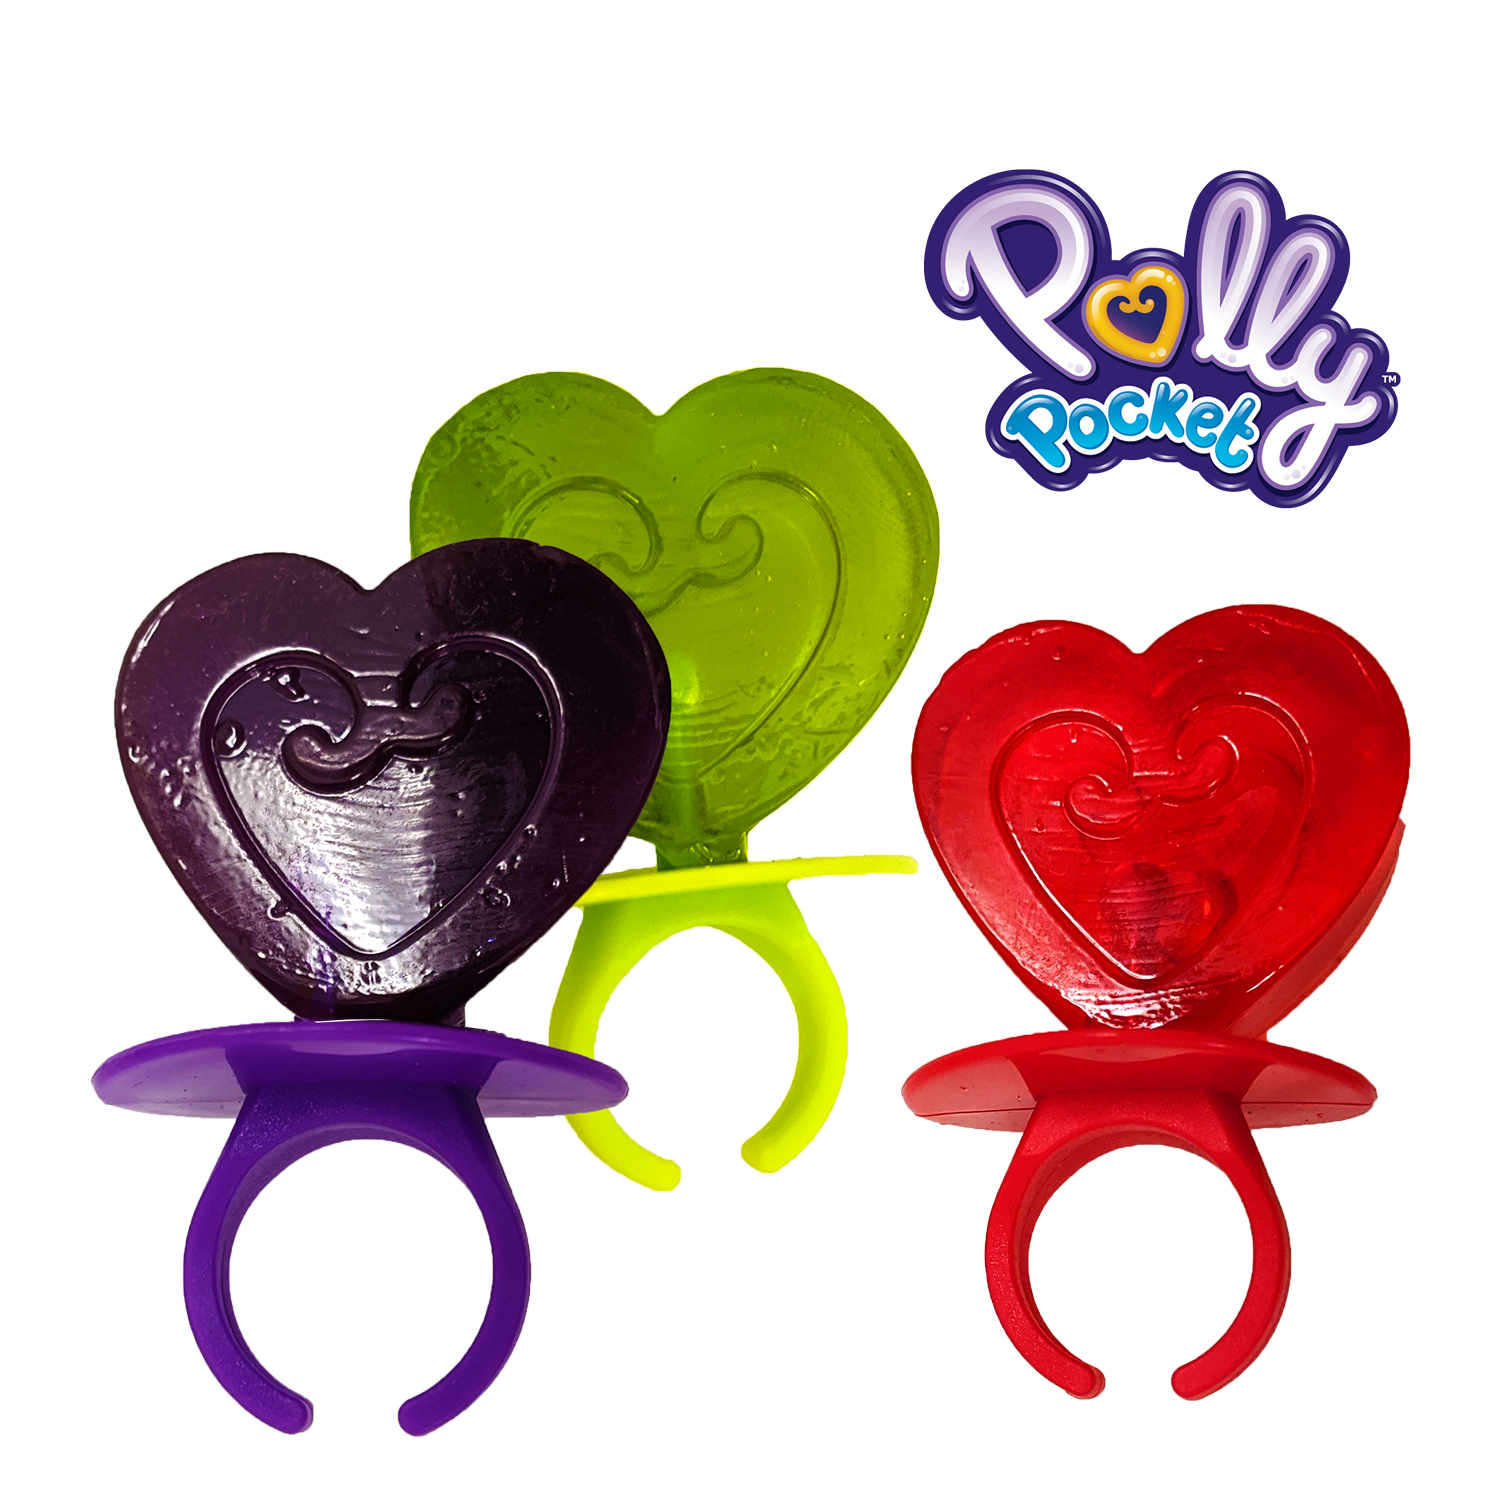 https://exclusivebrands.ca/wp-content/uploads/2021/02/prod-licensed-Polly_ring_lolly-e1613522753400.png